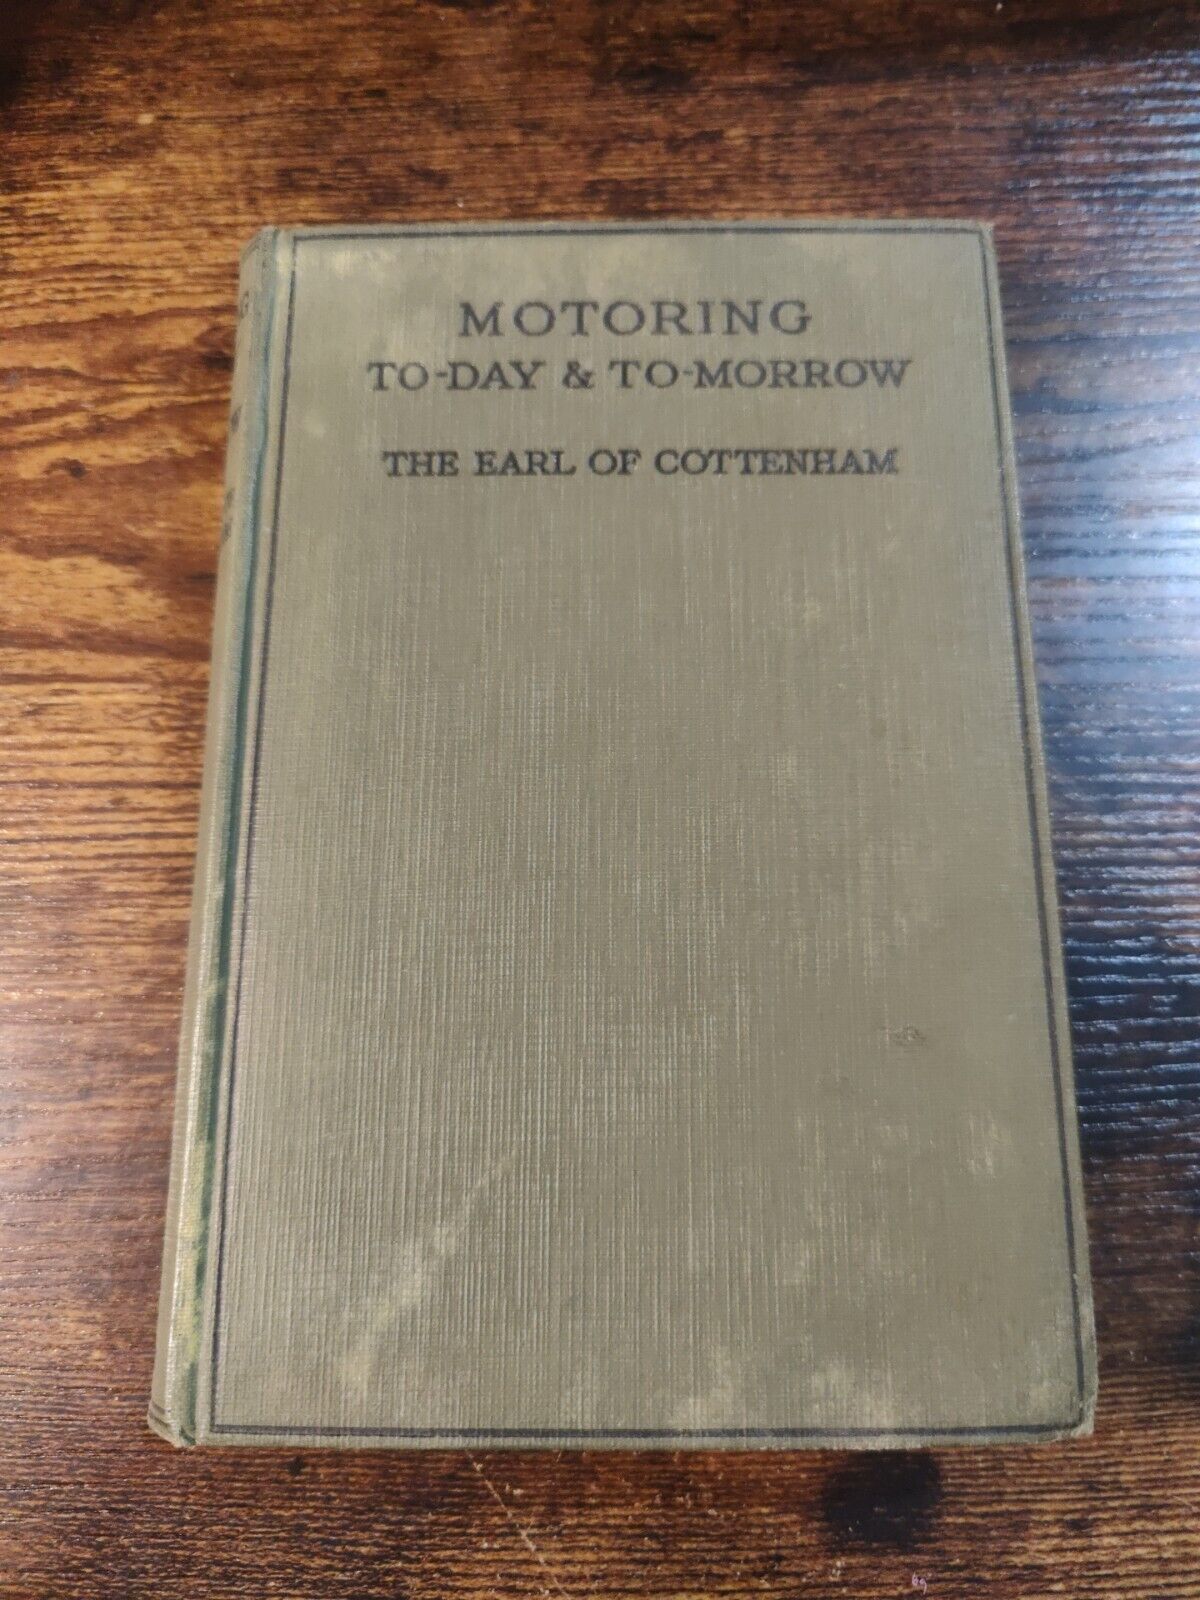 1928 Vintage Car Book: Motoring To-Day And To-Morrow By The Earl Of Cottenham